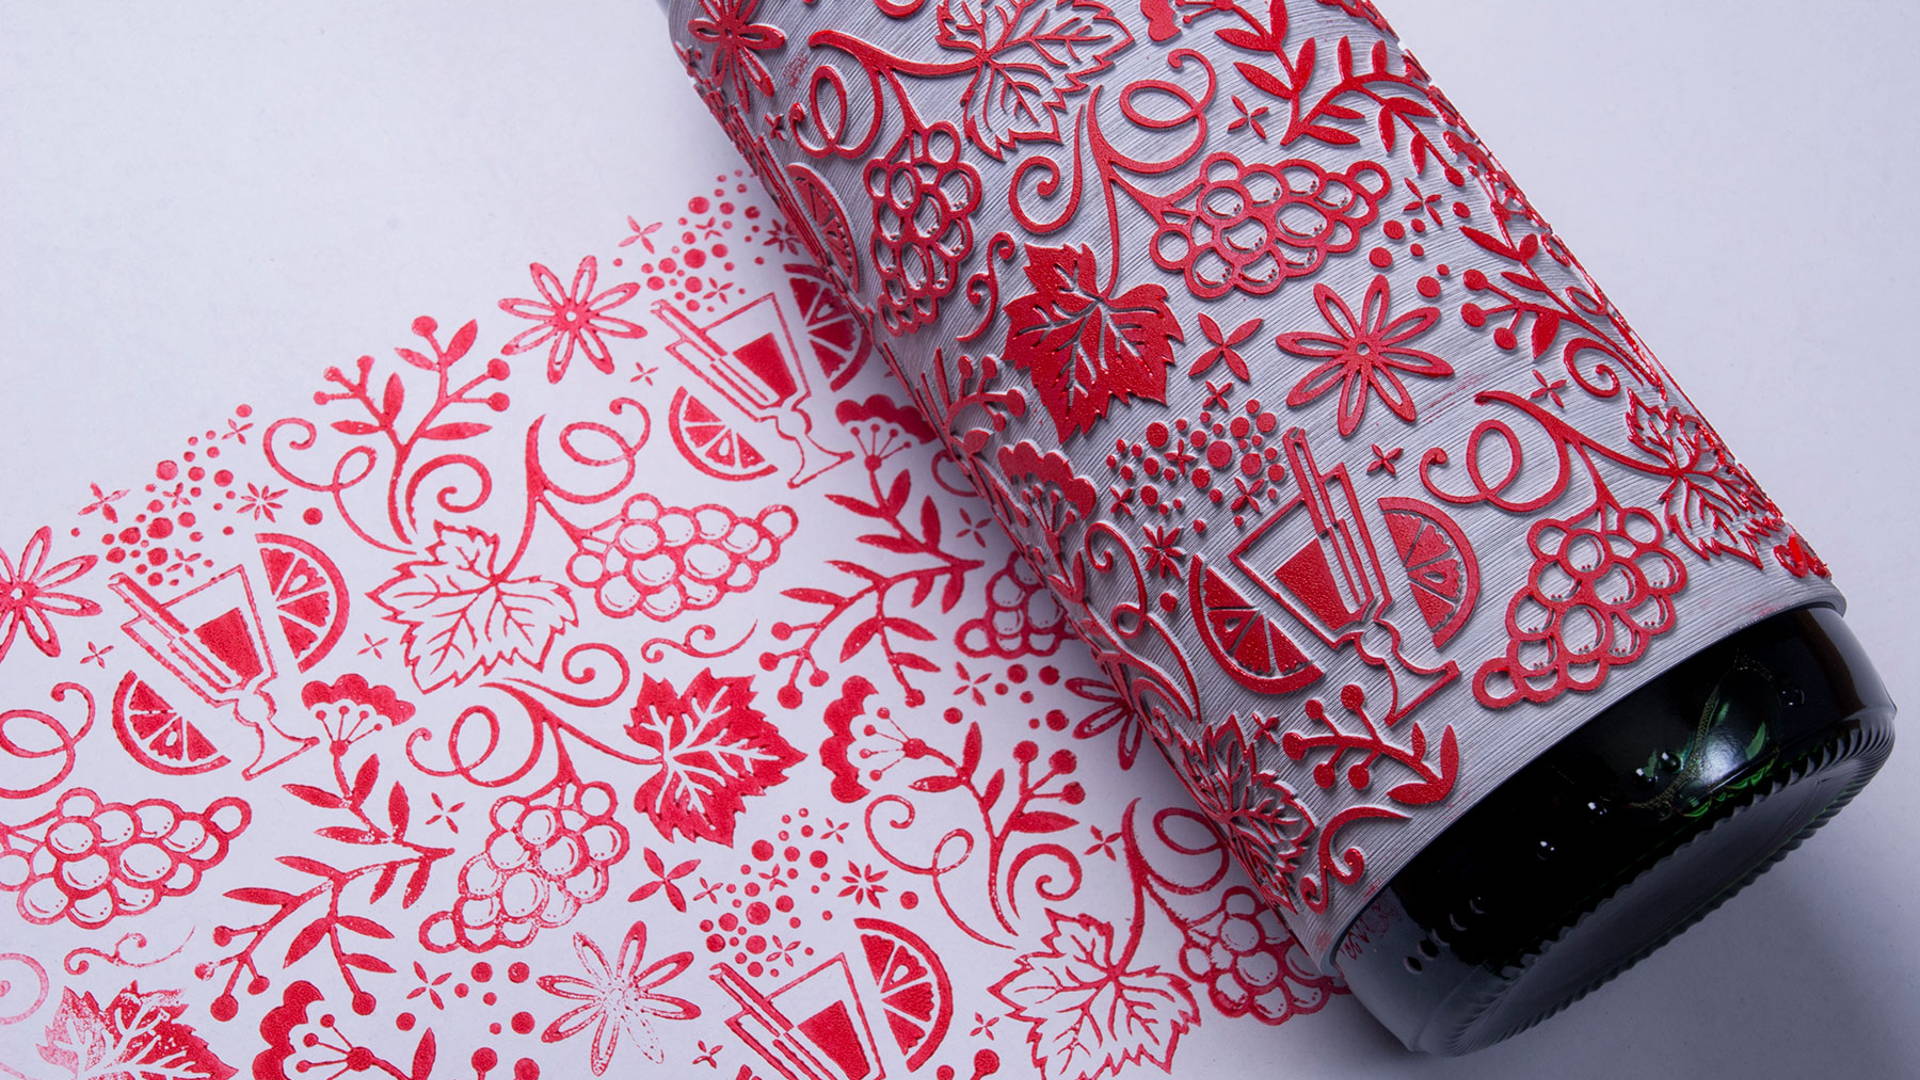 Featured image for You Can Make Some Pretty Sweet Wrapping Paper With This Bottle of Mulled Wine By Buddy Creative